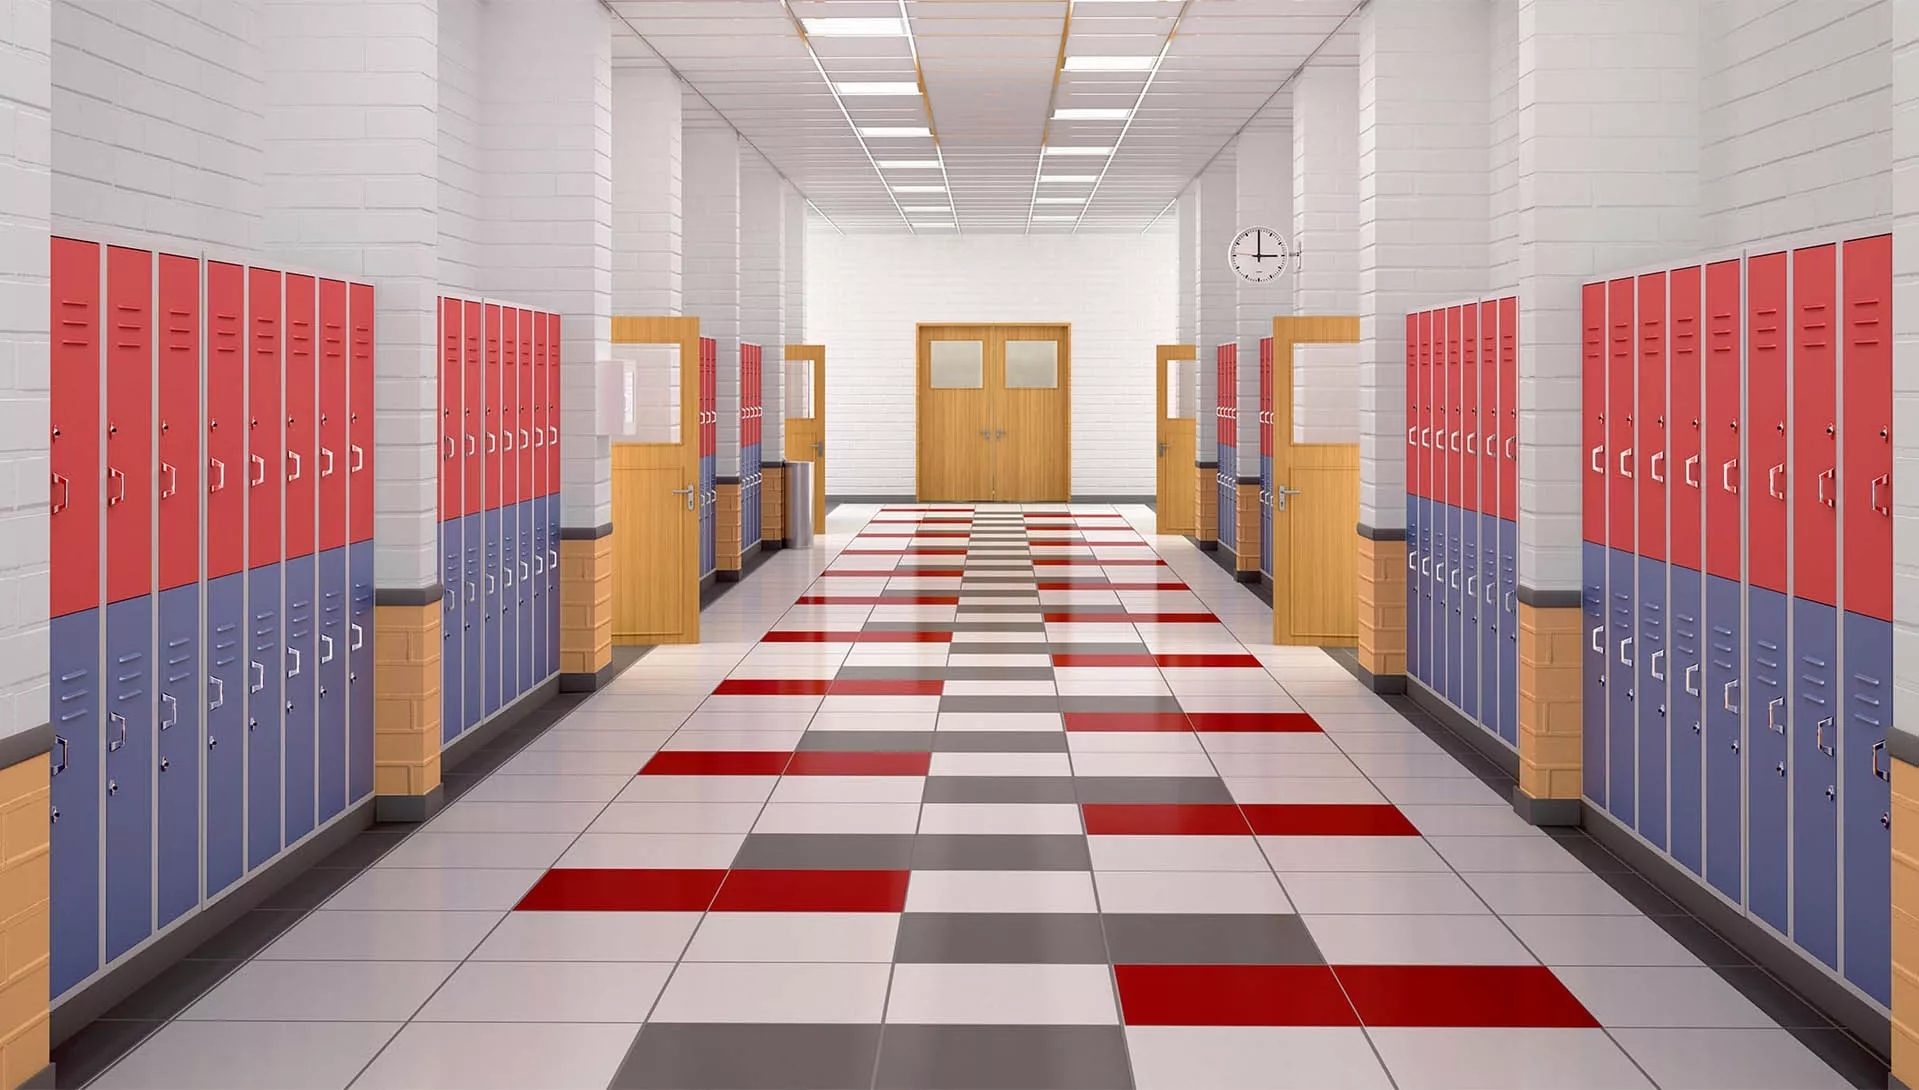 A clean, minimalist school hallway with primary colored lockers and a few open wooden doors to classrooms.